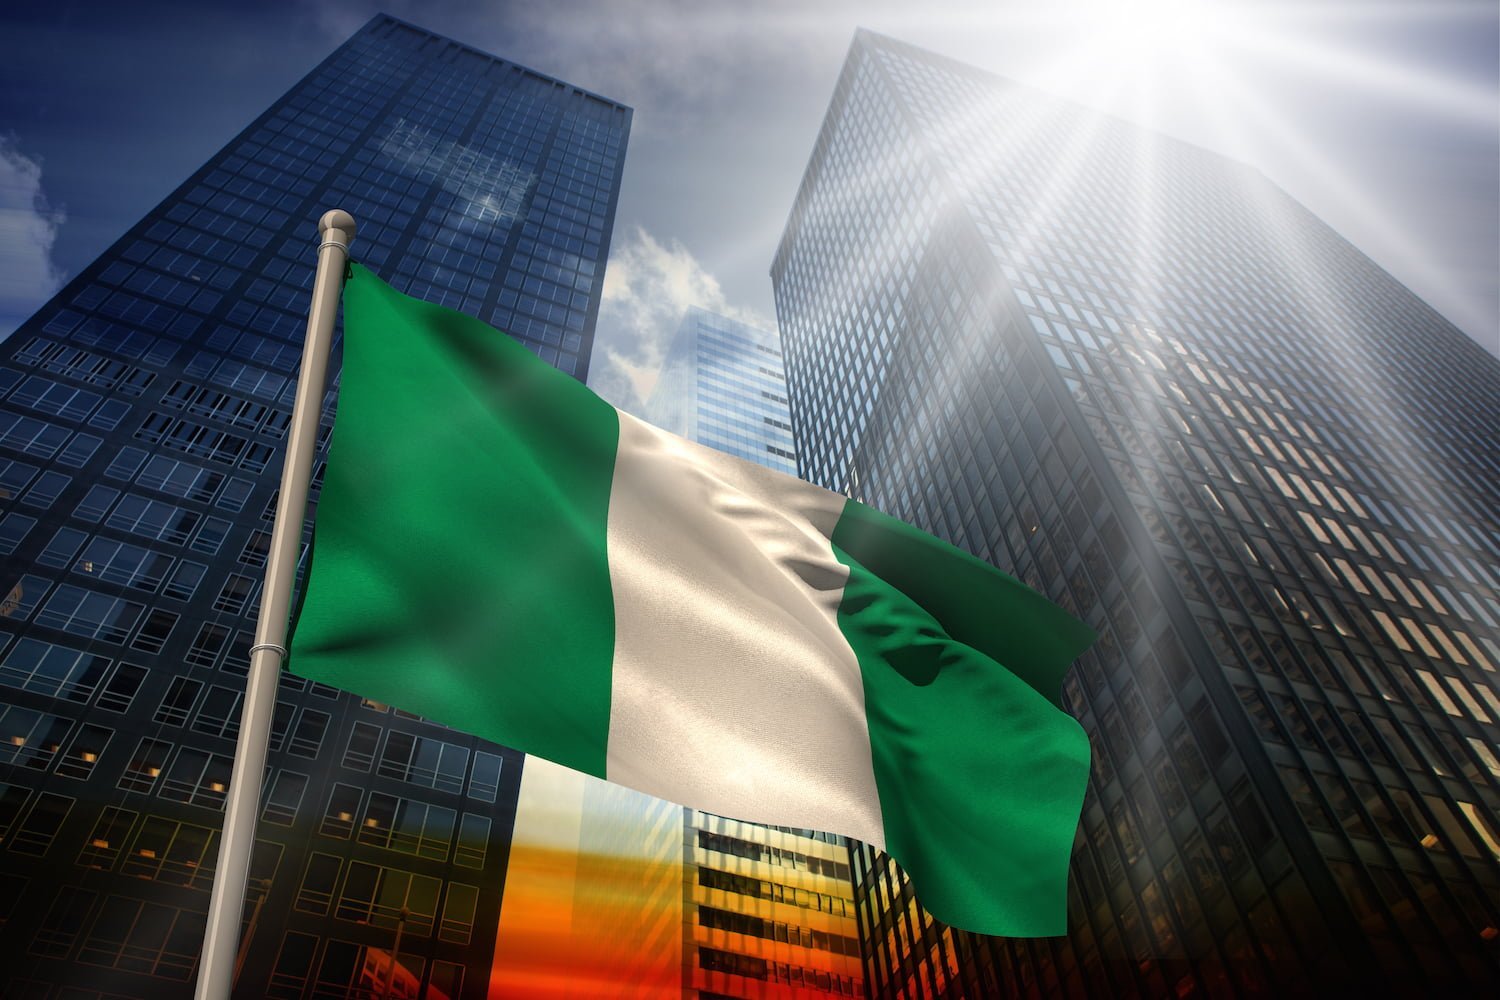 Binance teamed up with Nigerian authorities to build NEPZA